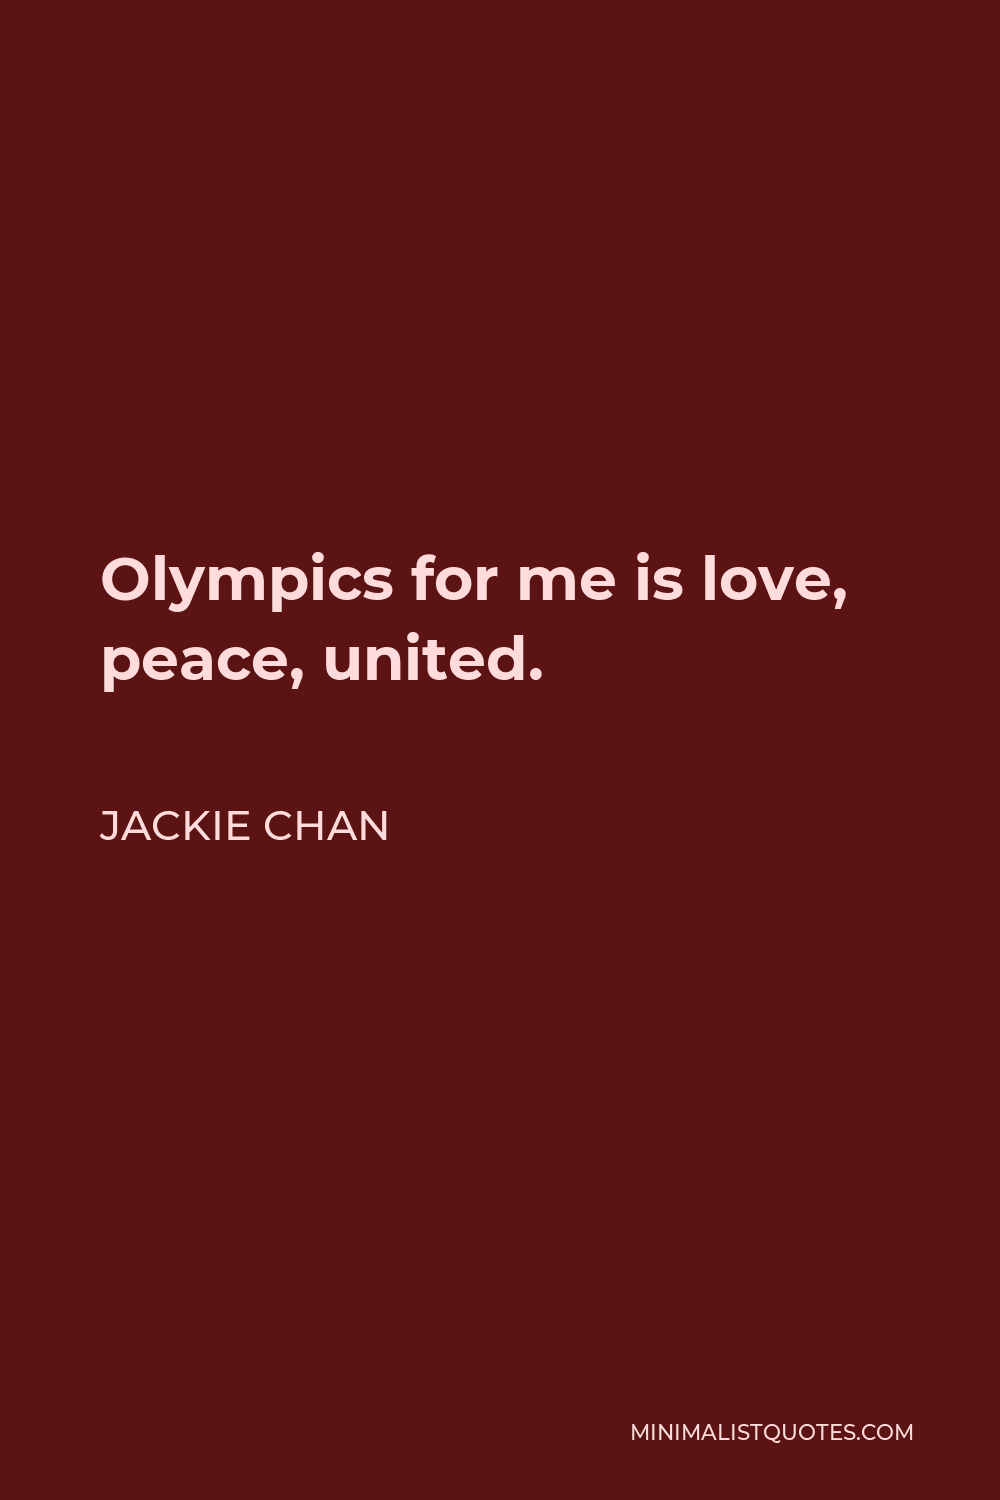 Jackie Chan Quote - Olympics for me is love, peace, united.